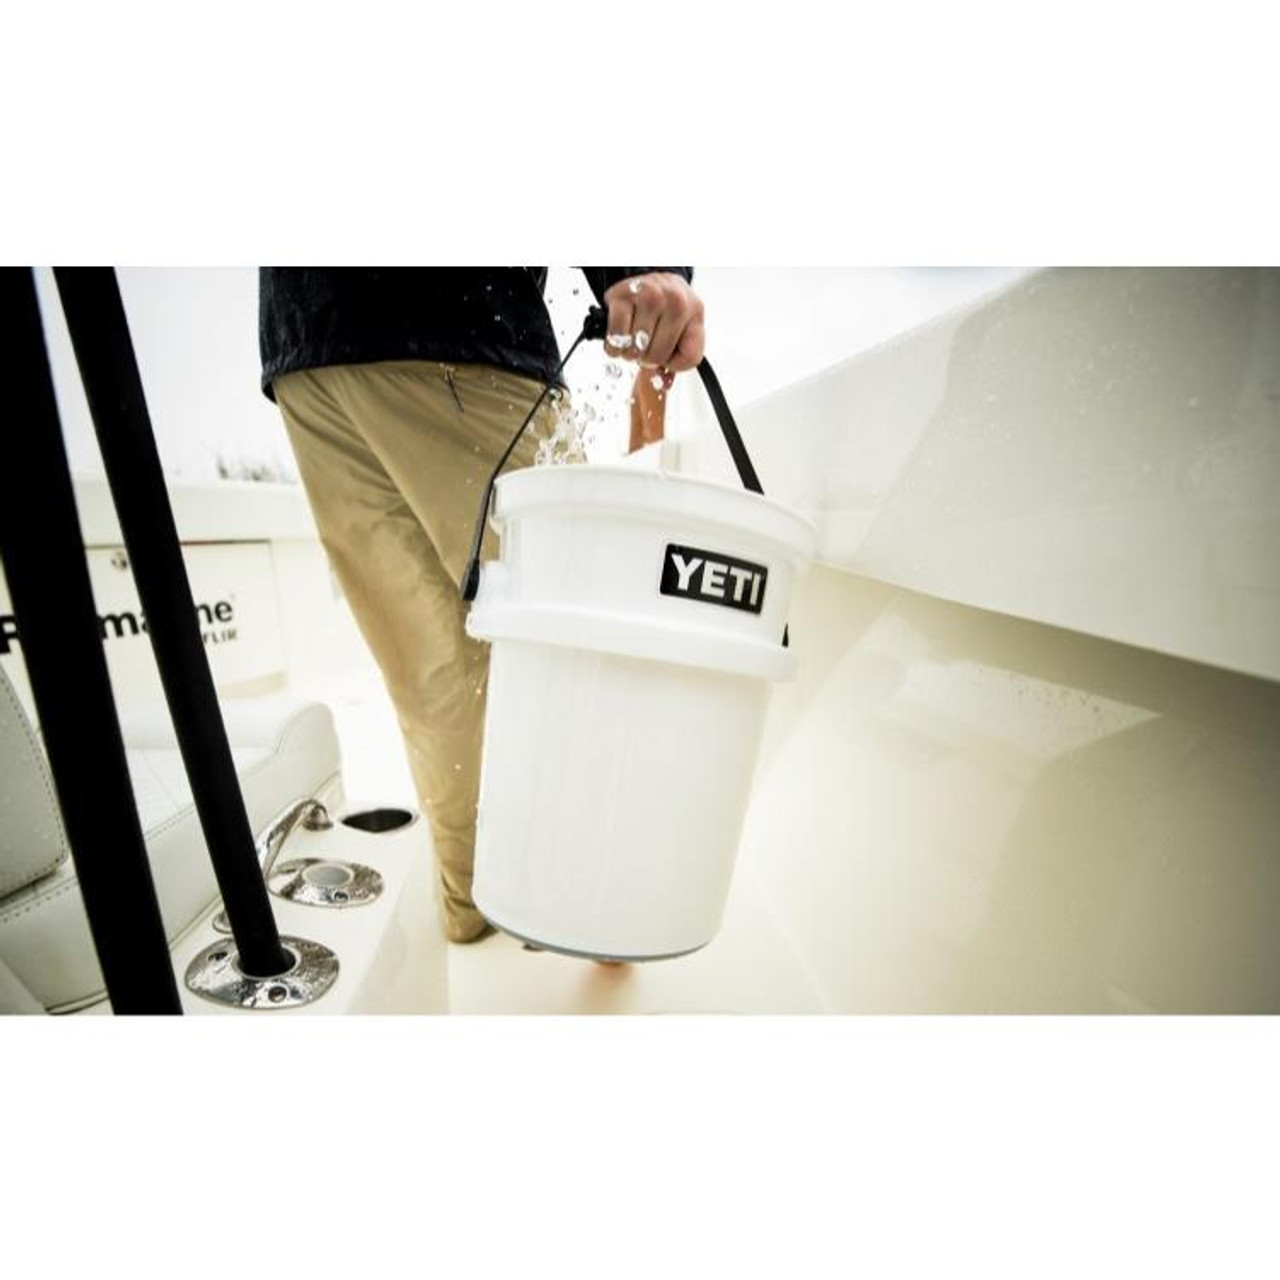 https://cdn11.bigcommerce.com/s-70mih4s/images/stencil/1280x1280/products/15295/37529/Yeti-Loadout-Bucket-White-888830021033_image3__94954.1505507172.jpg?c=2